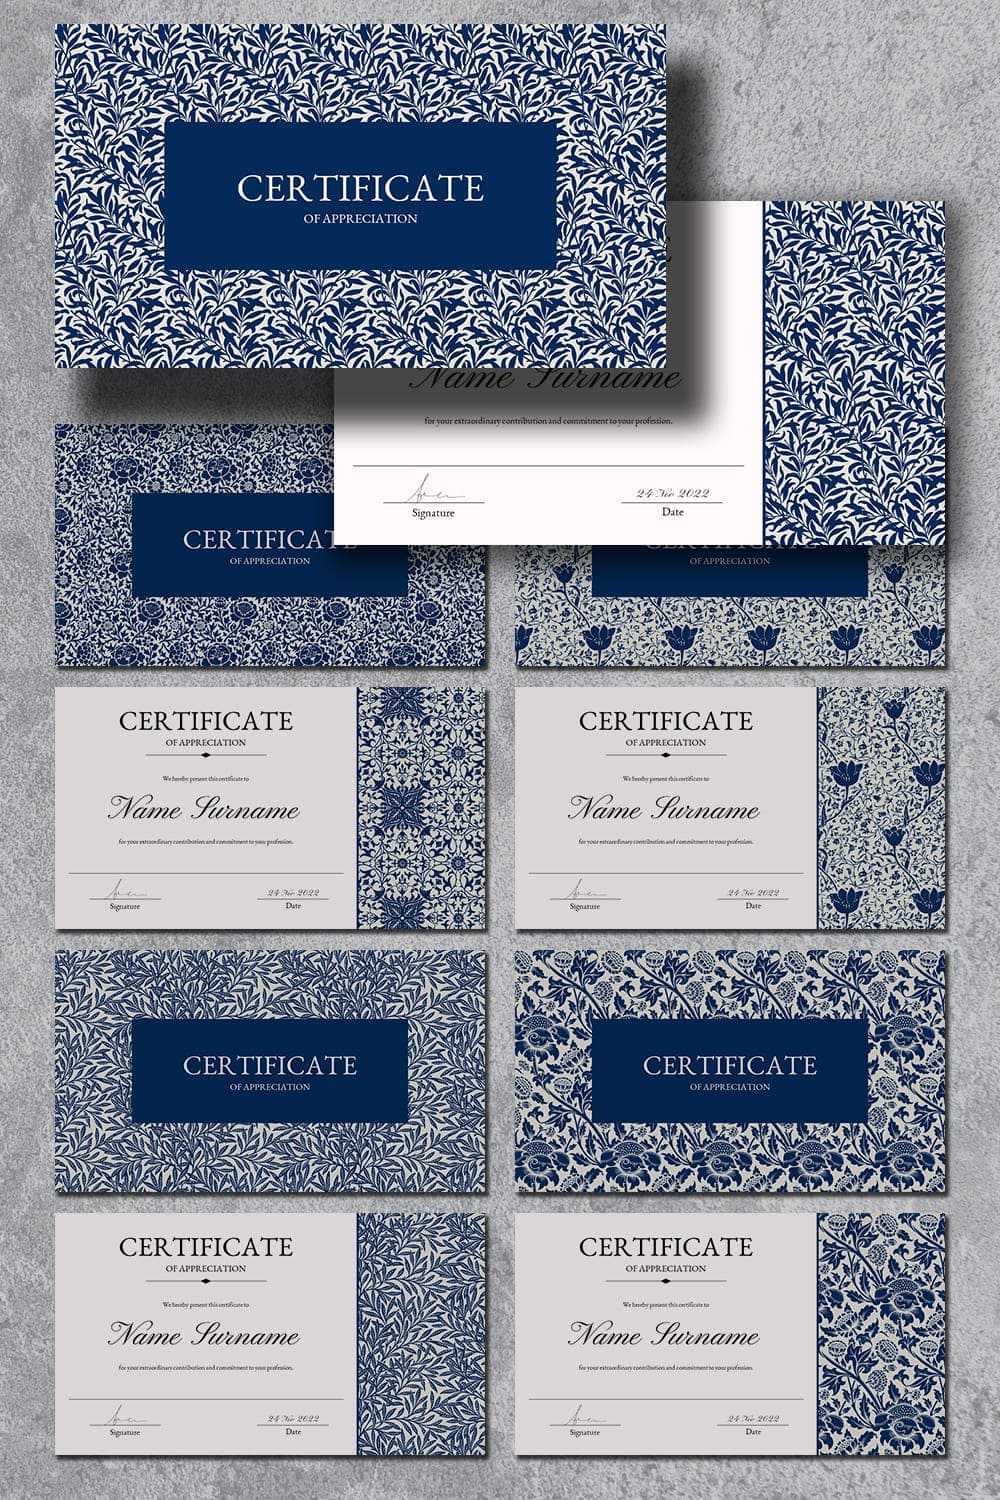 Certificate of appreciation powerpoint template, picture for pinterest 1000x1500.